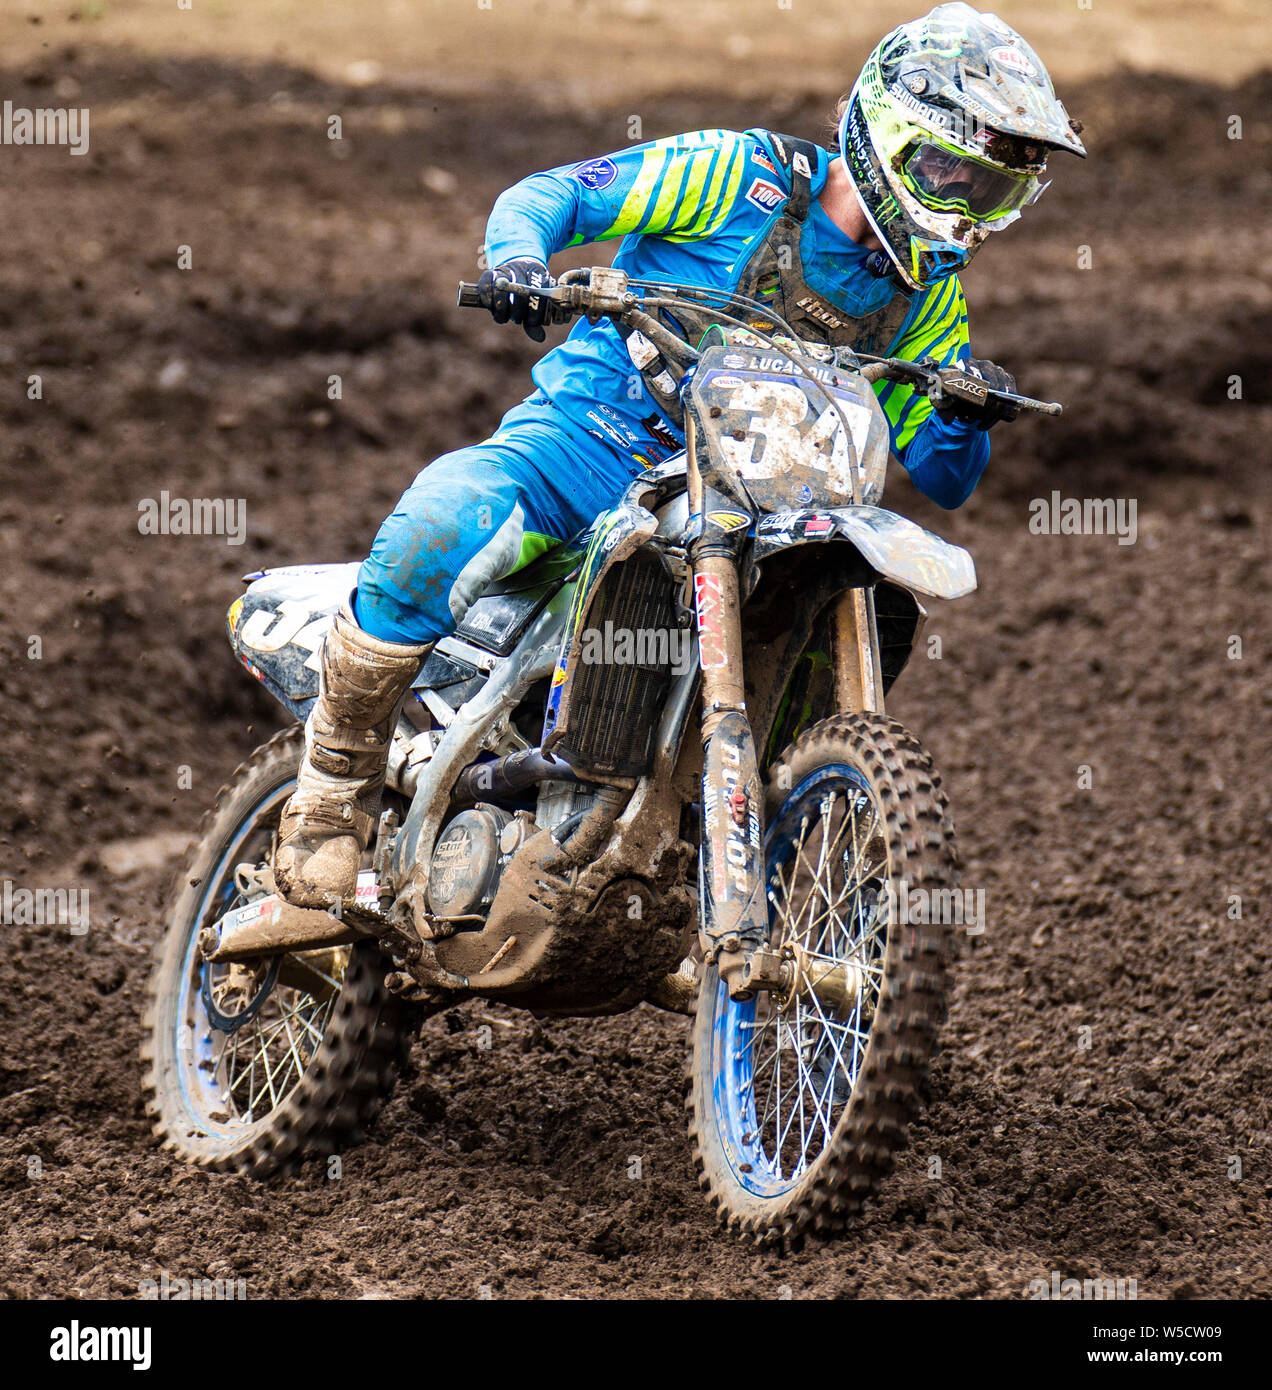 Washougal, USA. 27th July, 2019. # 34 Dylan Ferrandos coming out of turn 31 during the Lucas Oil Pro Motocross Washougal Championship 250 class moto # 1 at Washougal MX park Washougal, WA Thurman James/CSM/Alamy Live News Stock Photo